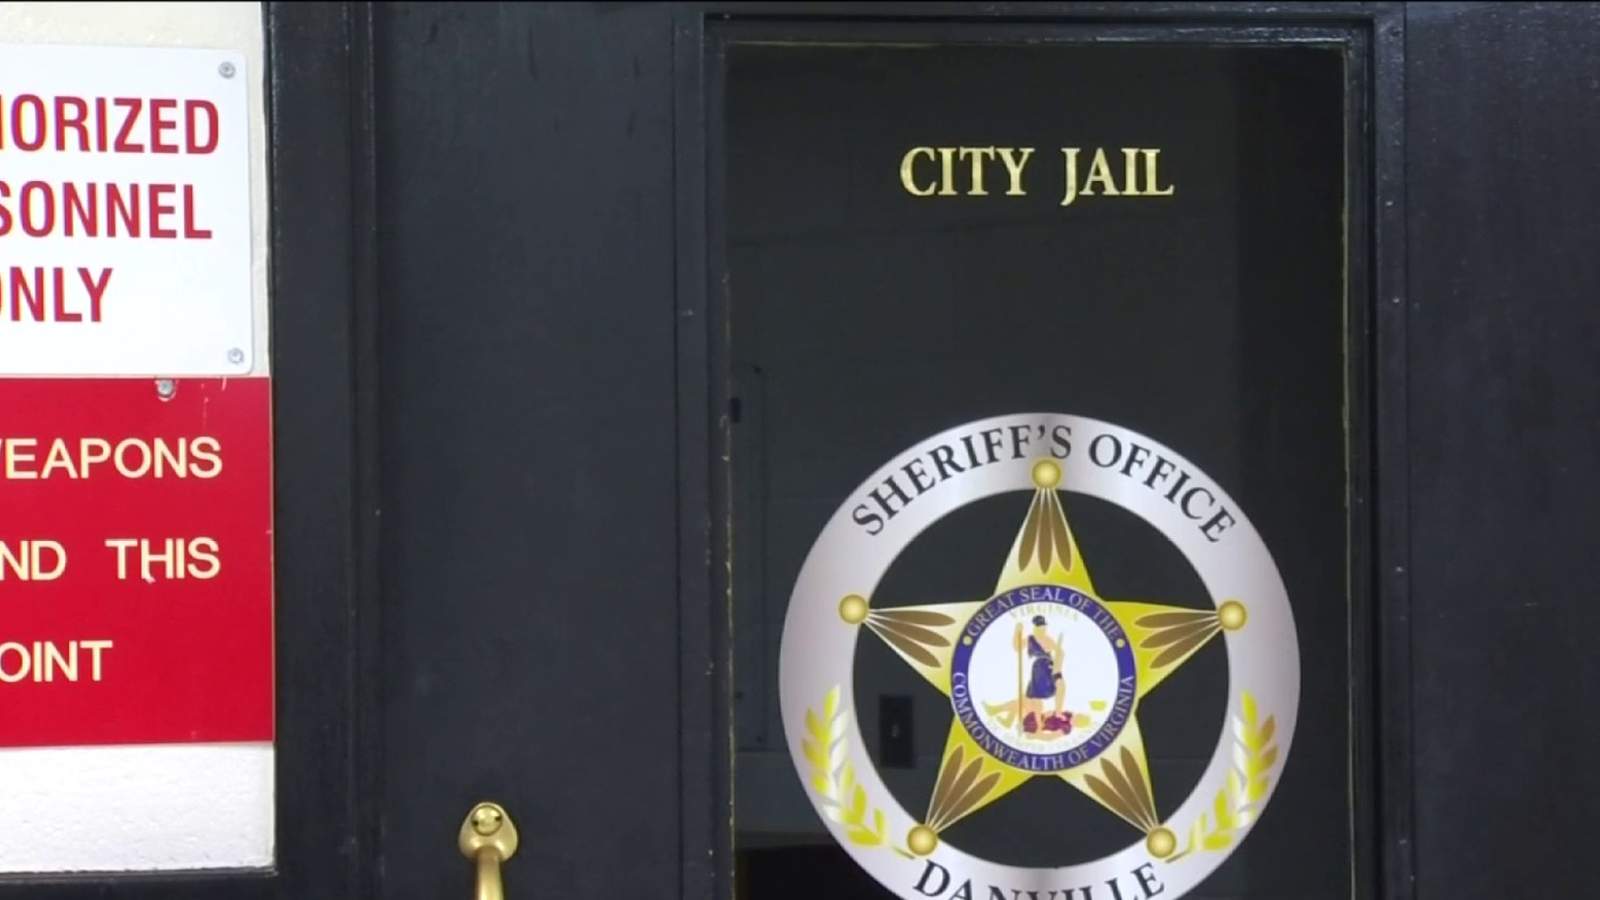 Danville City Jail has seen 87 positive COVID-19 test results to date, with masks now required